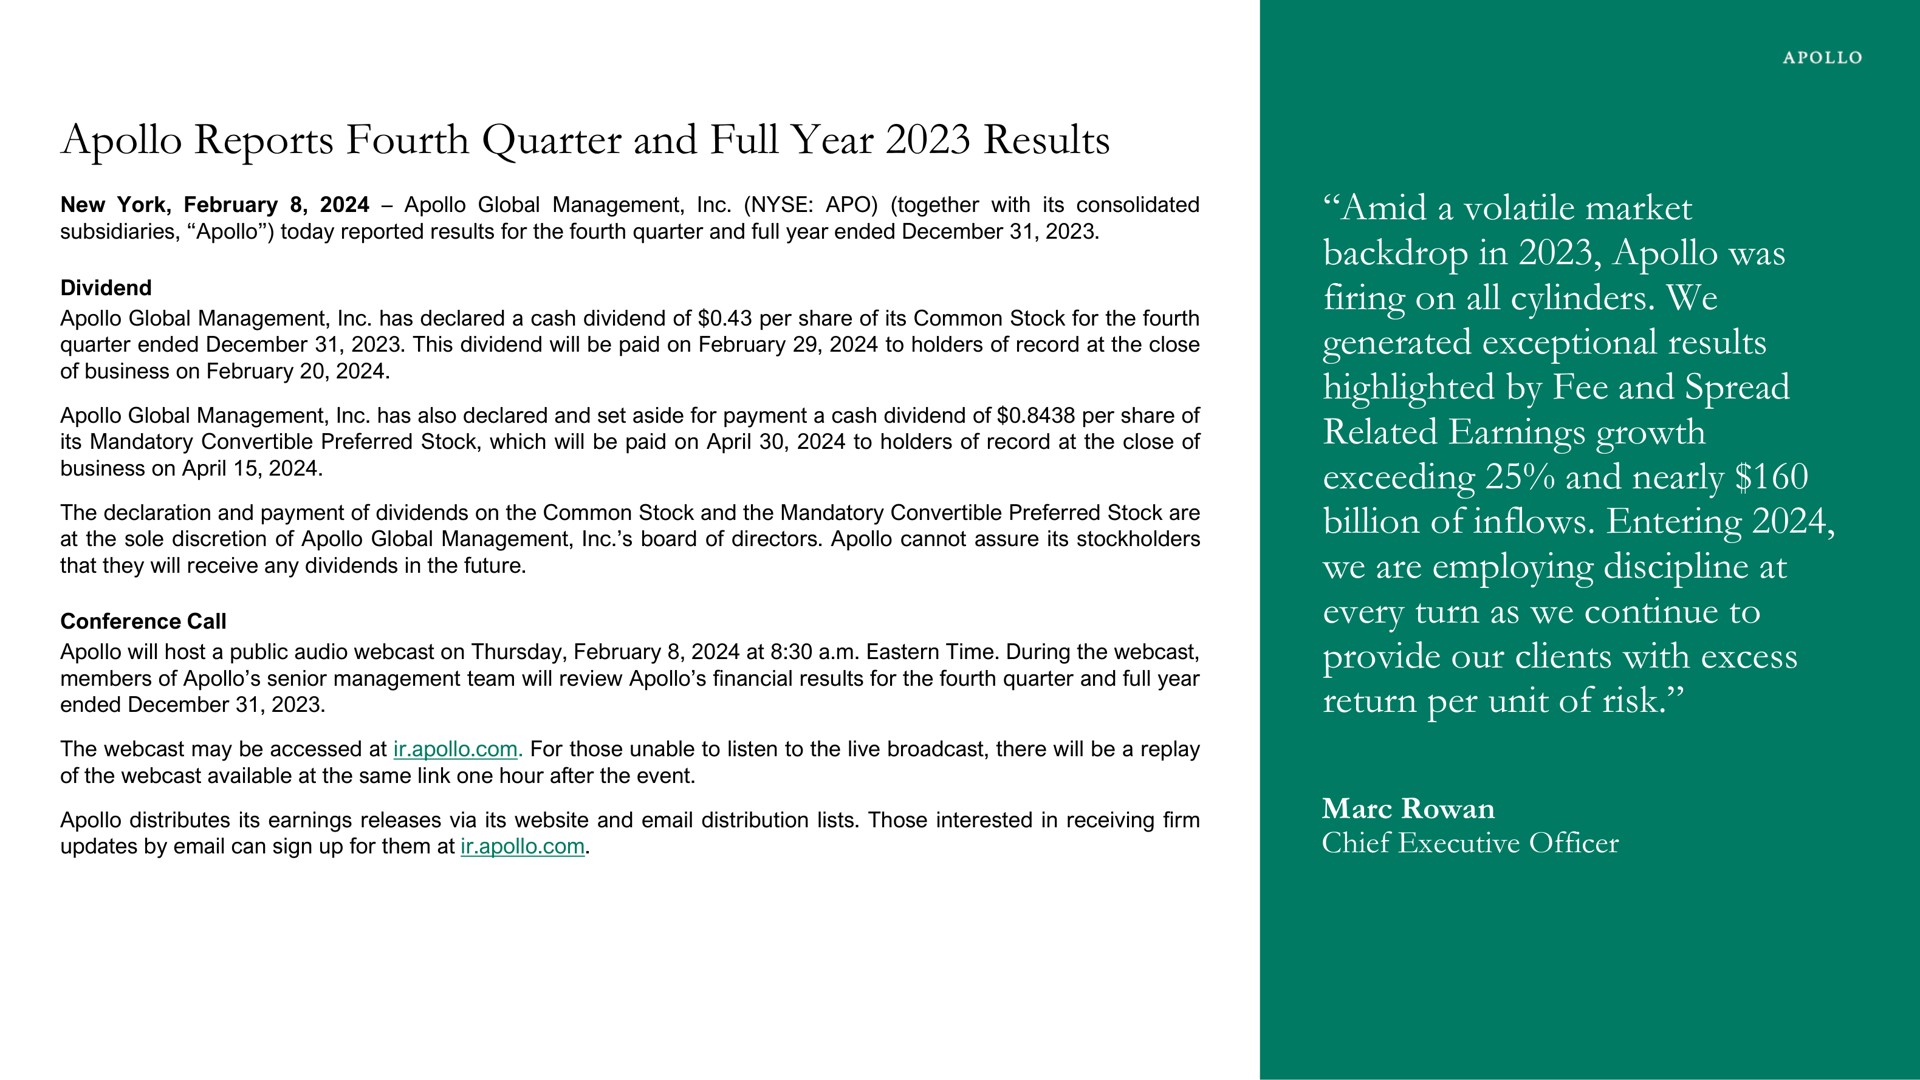 reports fourth quarter and full year results amid a volatile market backdrop in was firing on all cylinders we generated exceptional results highlighted by fee and spread related earnings growth exceeding and nearly billion of inflows entering we are employing discipline at every turn as we continue to provide our clients with excess return per unit of risk marc rowan chief executive officer ate lee | Apollo Global Management